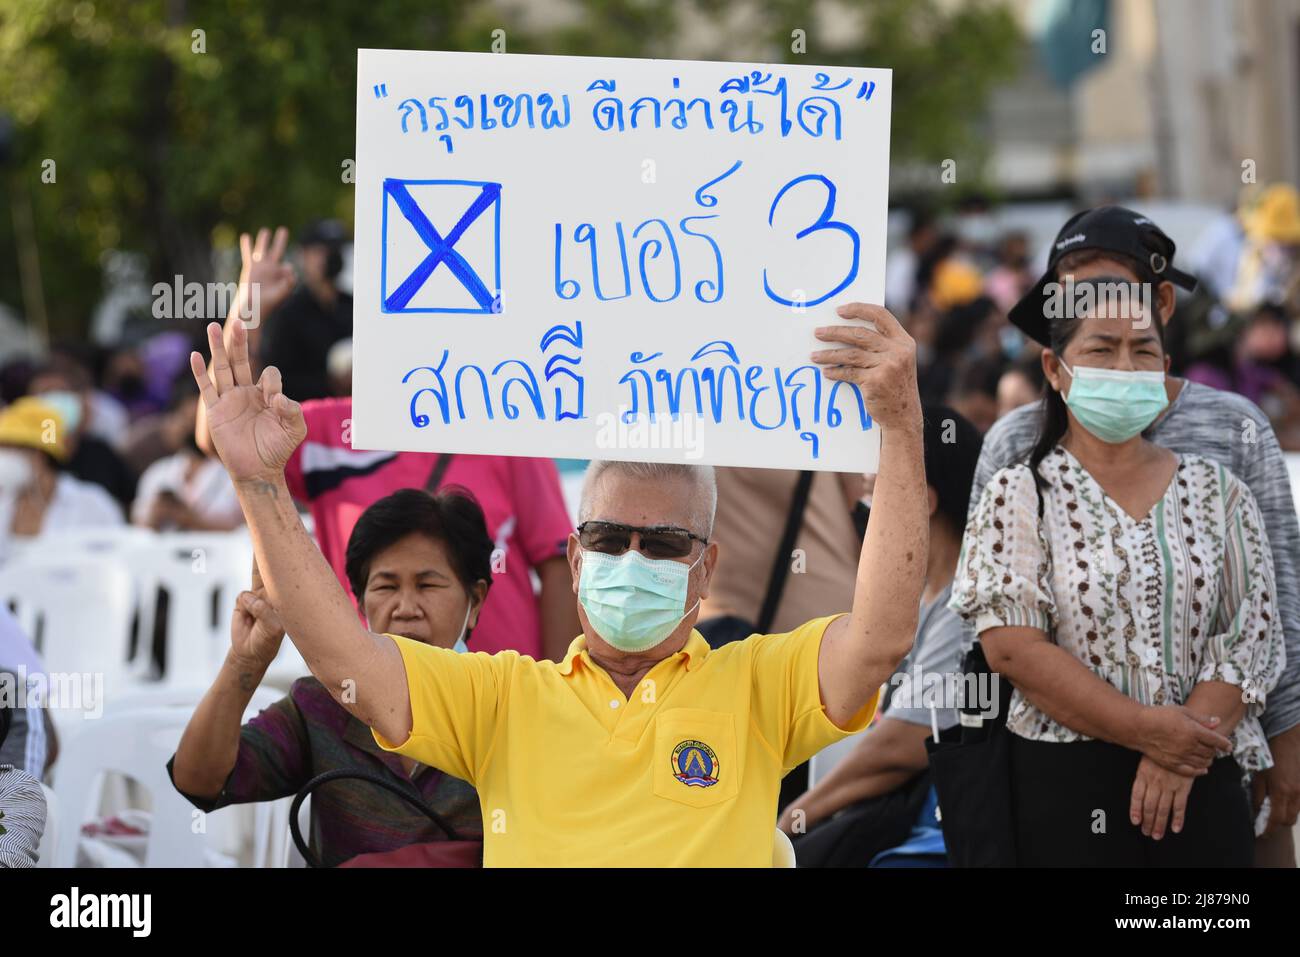 Bangkok, Thailand. 13th May, 2022. people's atmosphere and supporters attended a speech by Sakoltee Phattiyakul, Candidate Bangkok Governor, number 3 at Lan Khon Meaung, front The Bangkok Metropolitan Administration, on May 13, 2022. (Photo by Teera Noisakran/Pacific Press) Credit: Pacific Press Media Production Corp./Alamy Live News Stock Photo